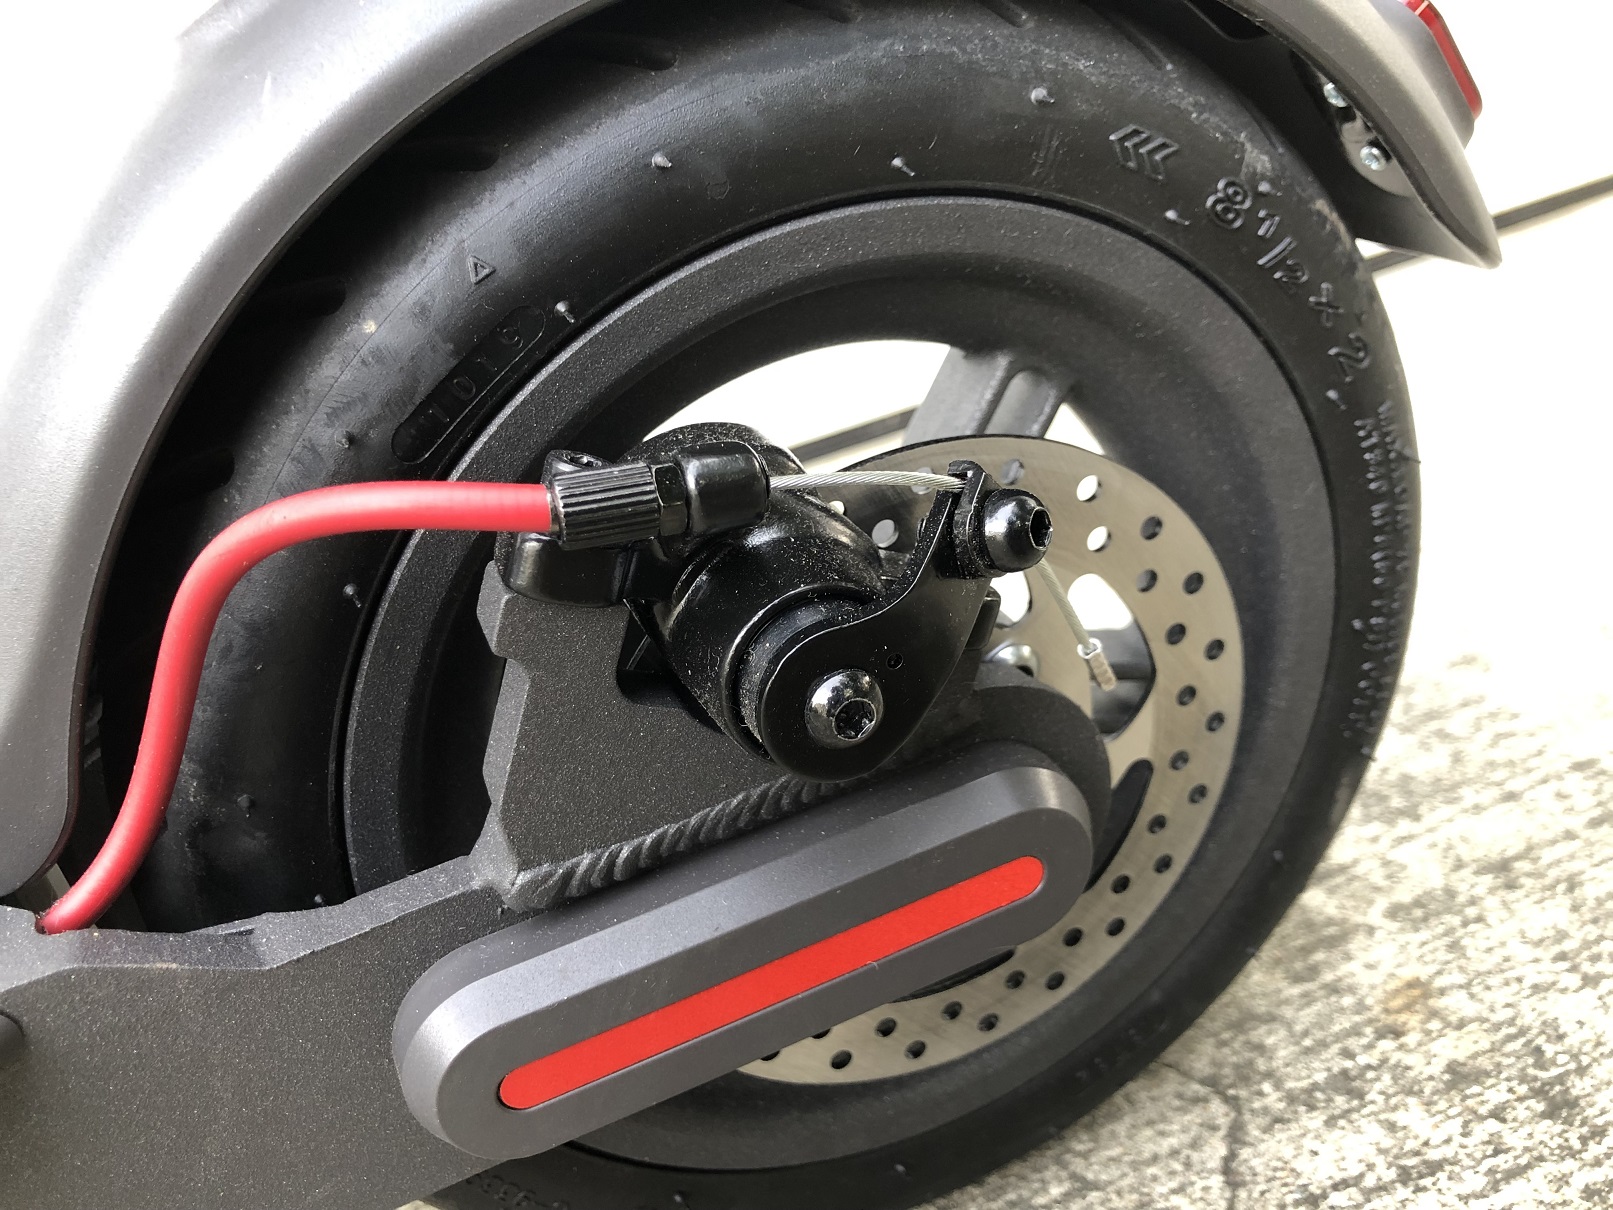 Mi Electric Scooter Back Wheel